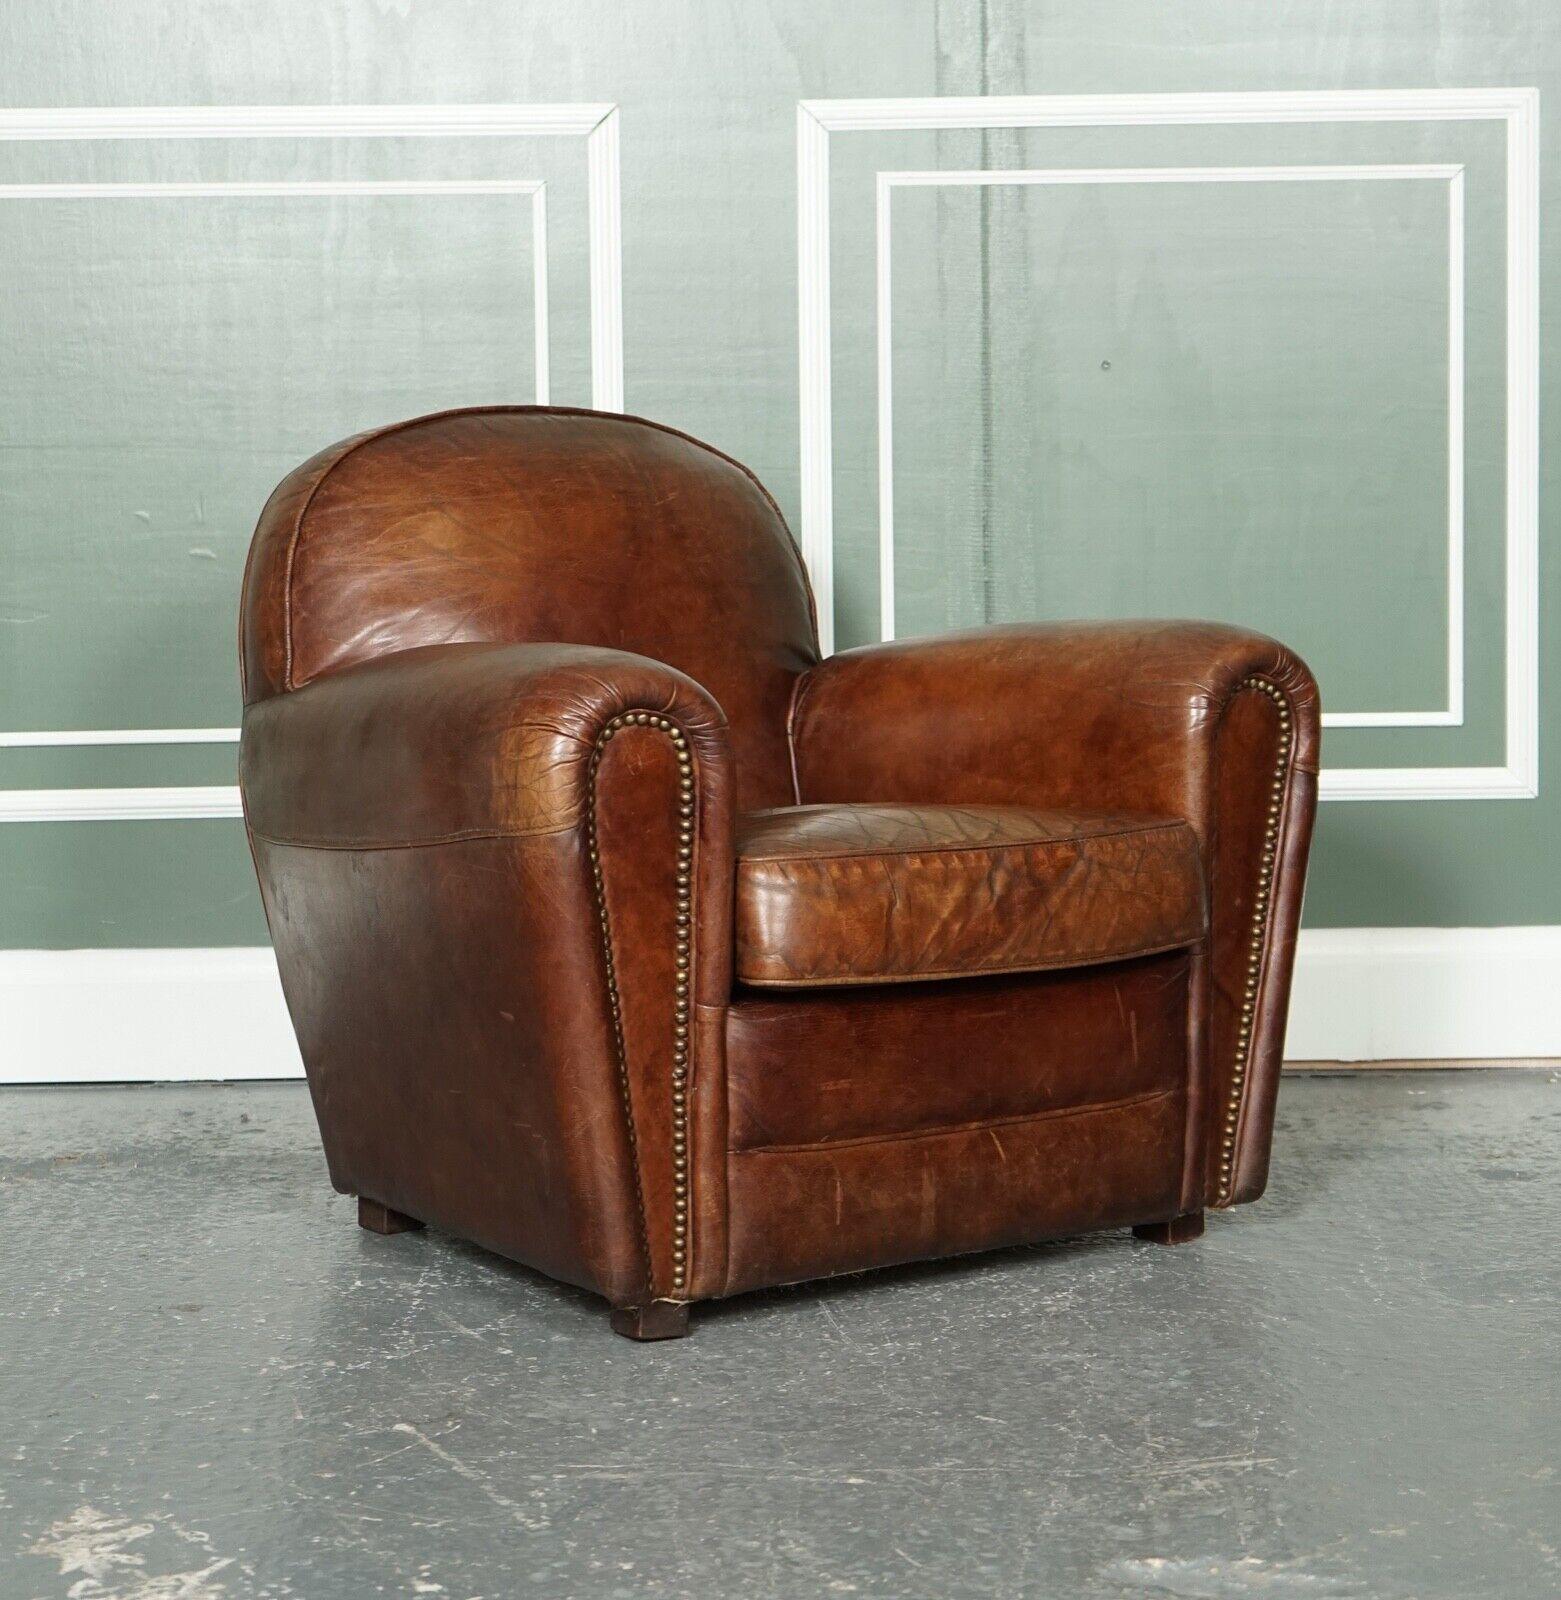 We are so excited to present to you this lovely Timothy Oulton hand-crafted leather club armchair.

Very stylish armchair and absolutely comfortable.
The leather has aged very well and left the expected patina all over.
We have recovered the